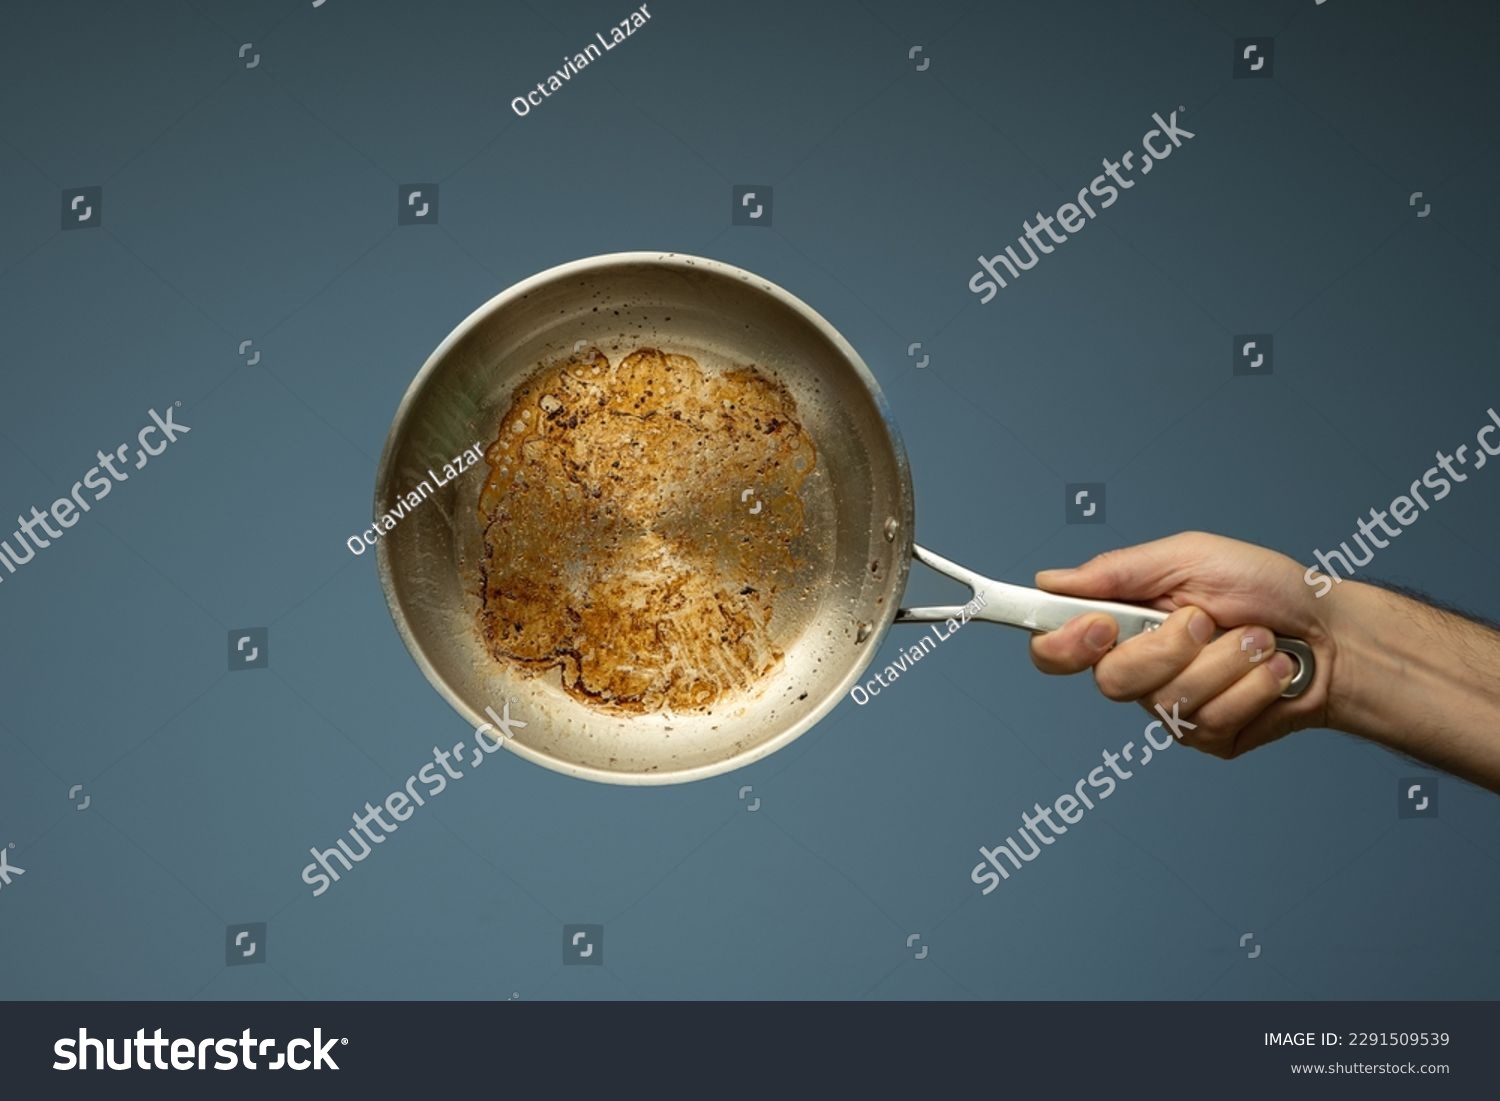 Dirty oily burnt metal frying pan held in hand by a male hand. Close up studio shot, isolated on a light blue background. #2291509539